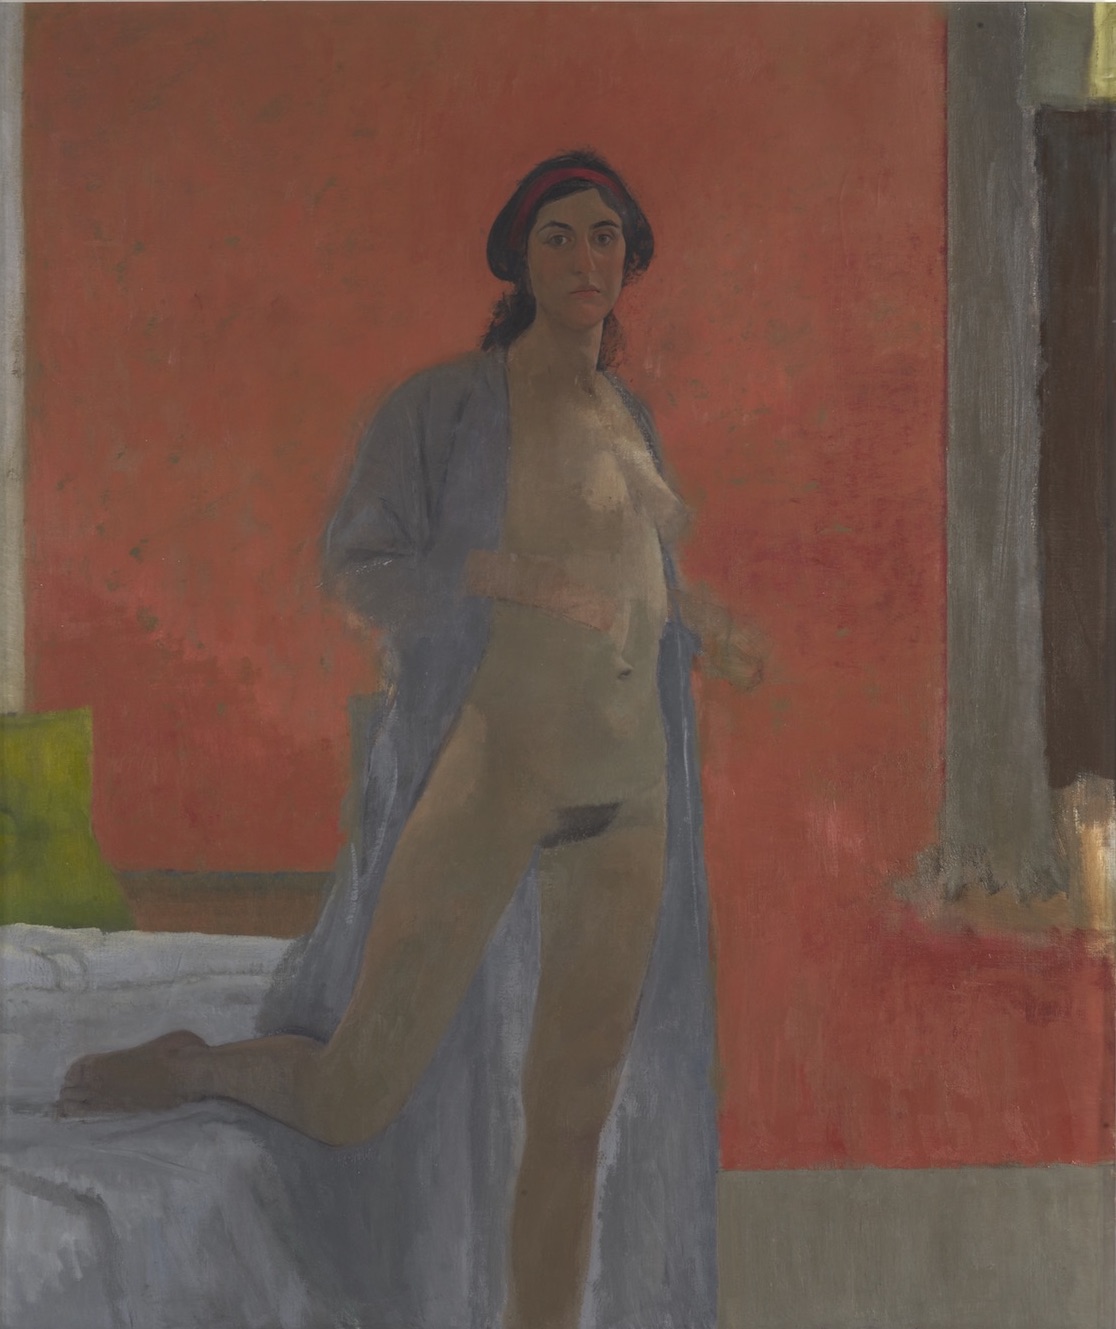 Women Artists in Italy, Suzanne Valadon, and Lennart Anderson